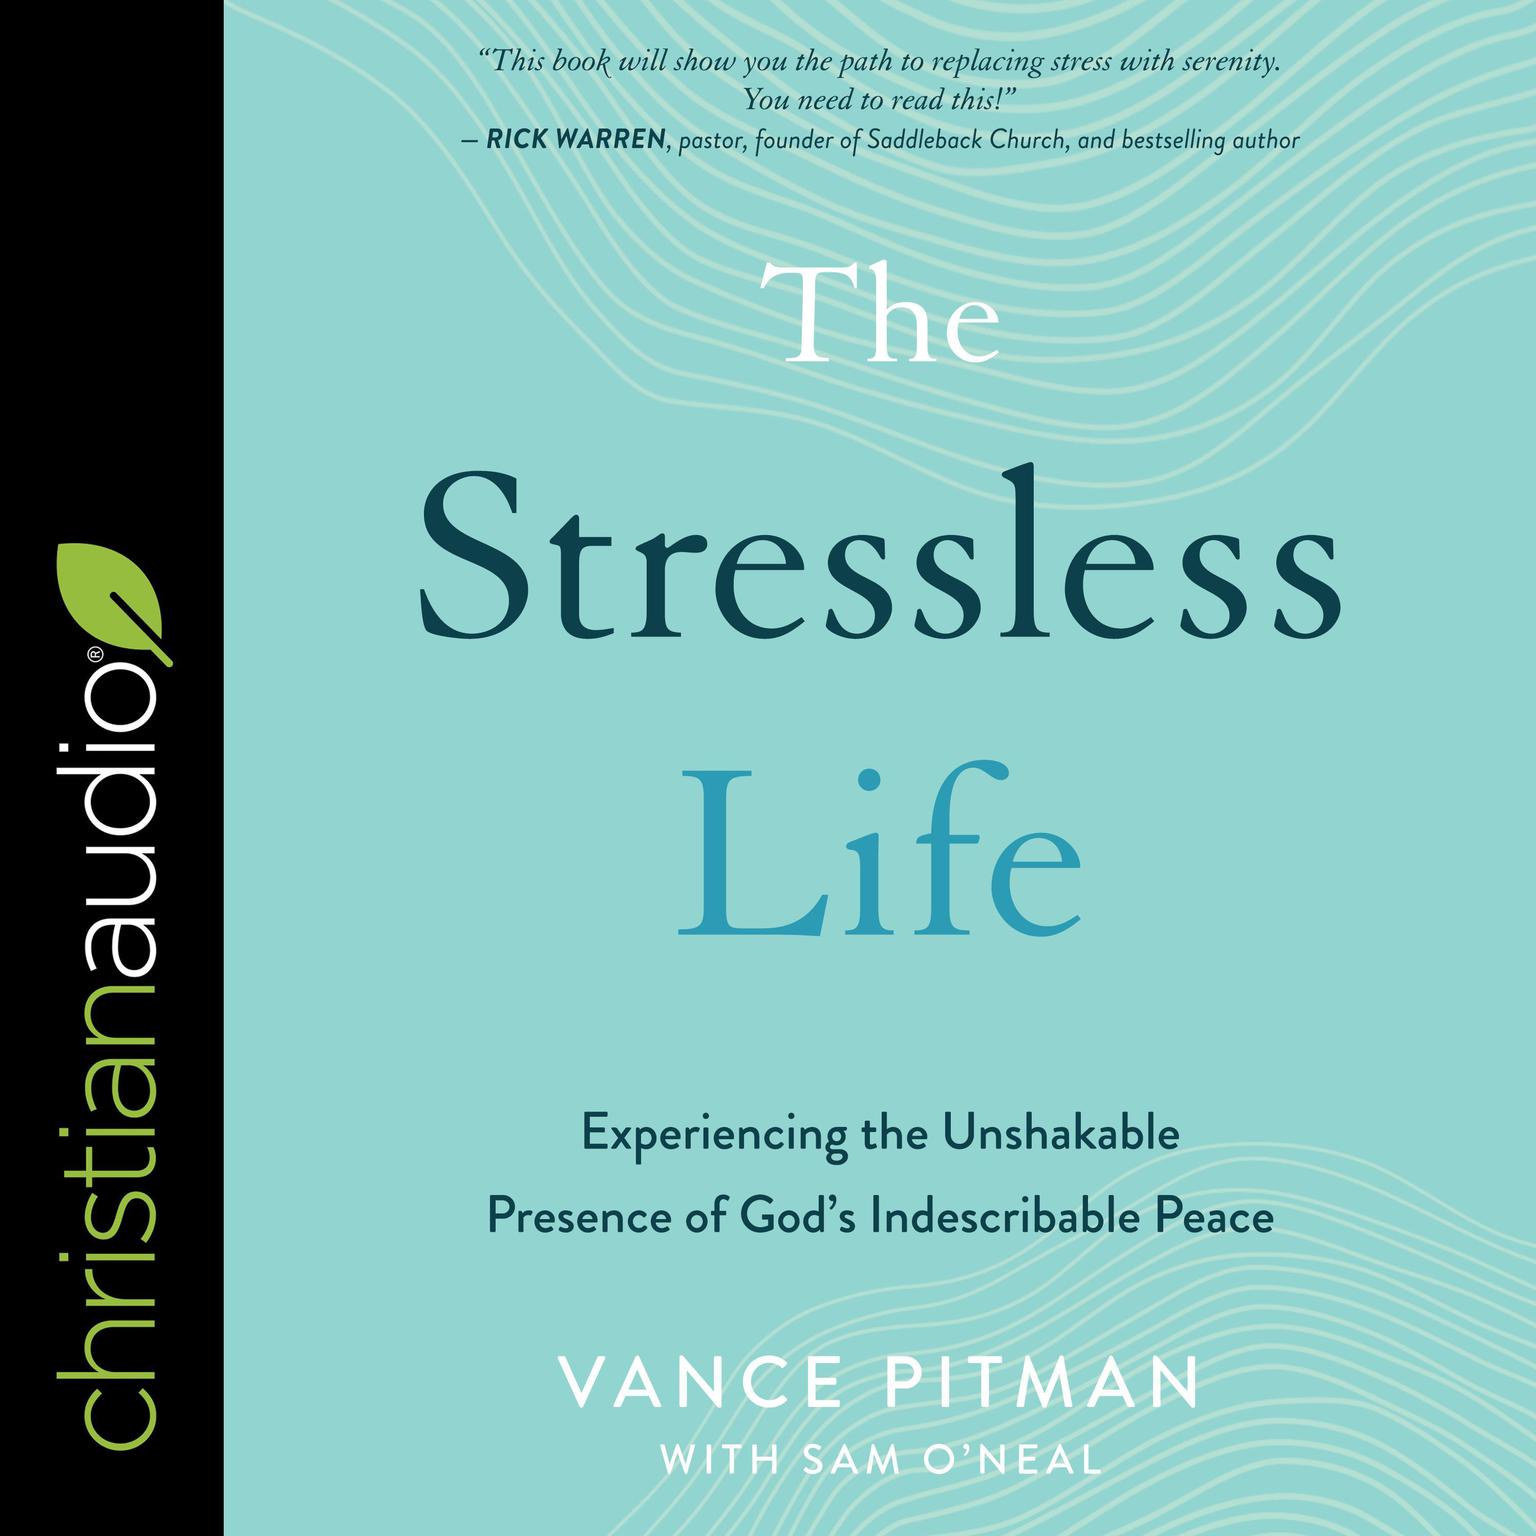 The Stressless Life: Experiencing the Unshakable Presence of Gods Indescribable Peace Audiobook, by Vance Pitman